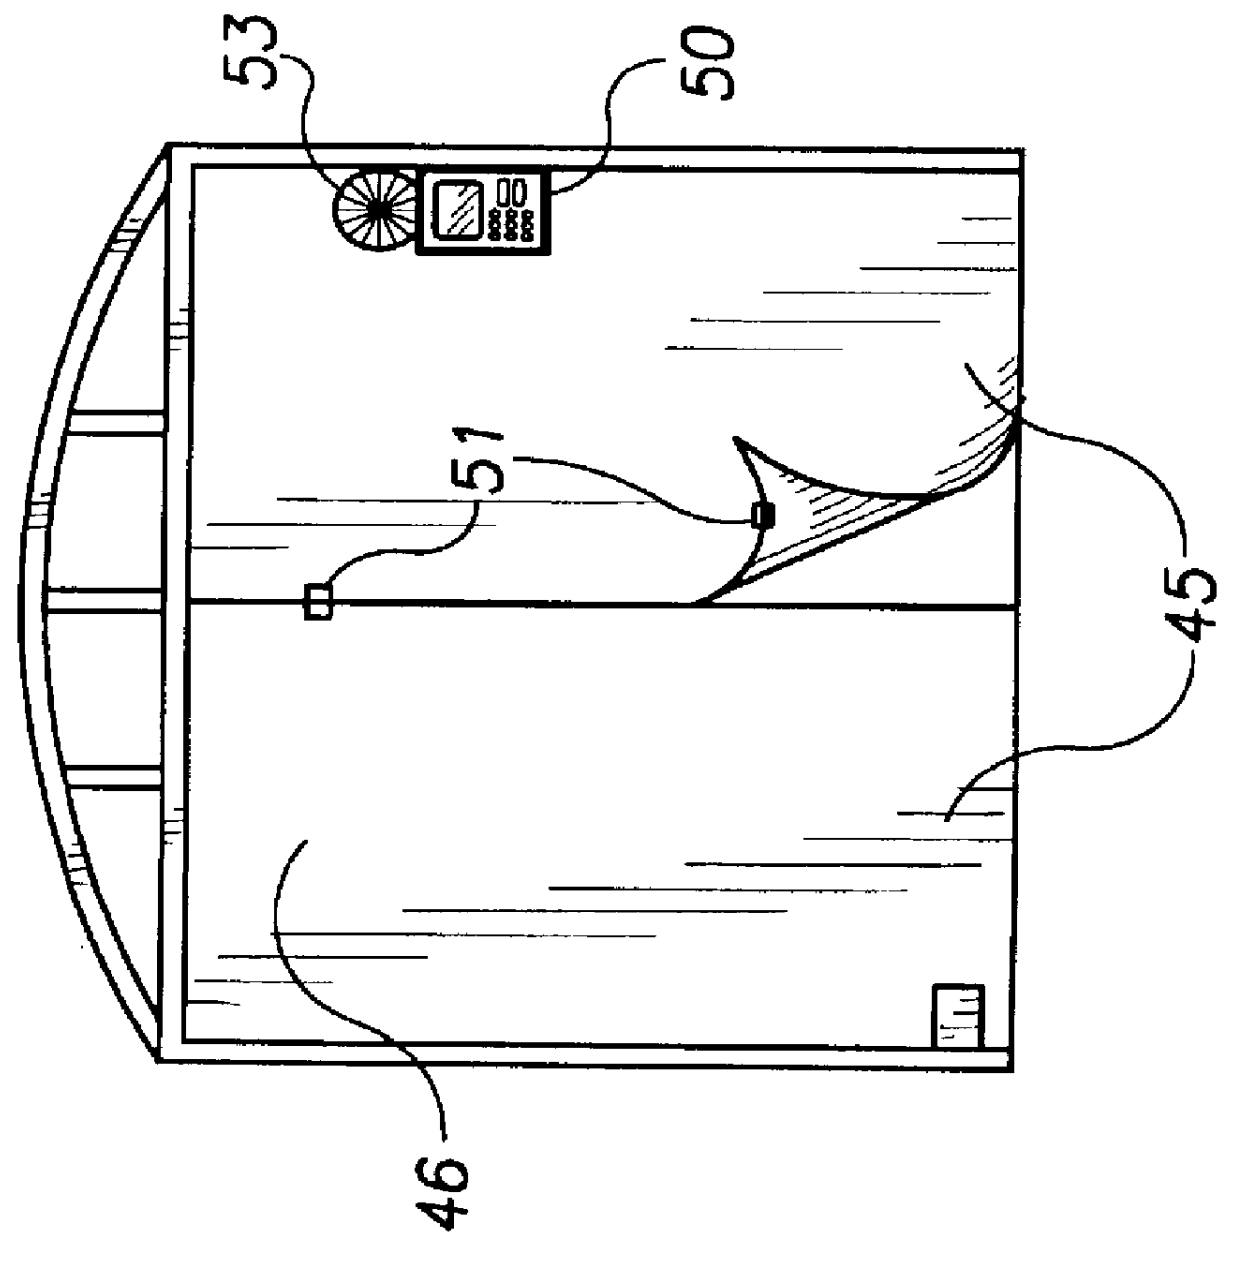 Inflatable structure with sealable compartment therein